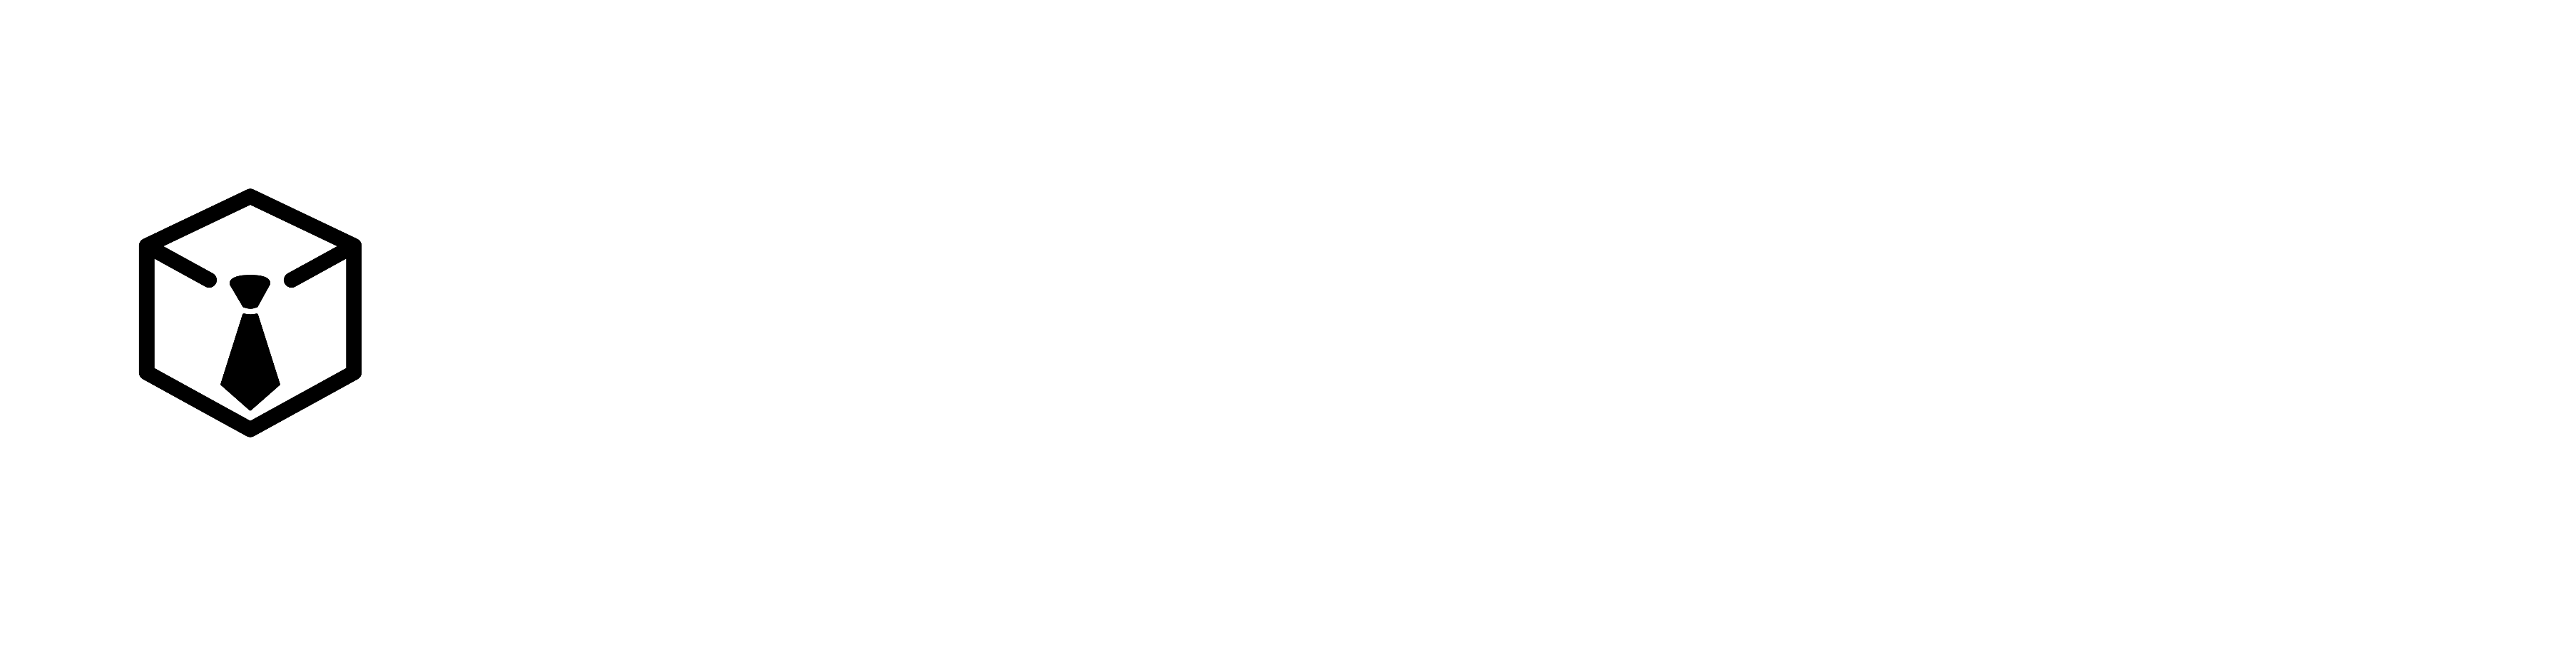 Fluency Space – Advanced Business English Fluency Coaching Online